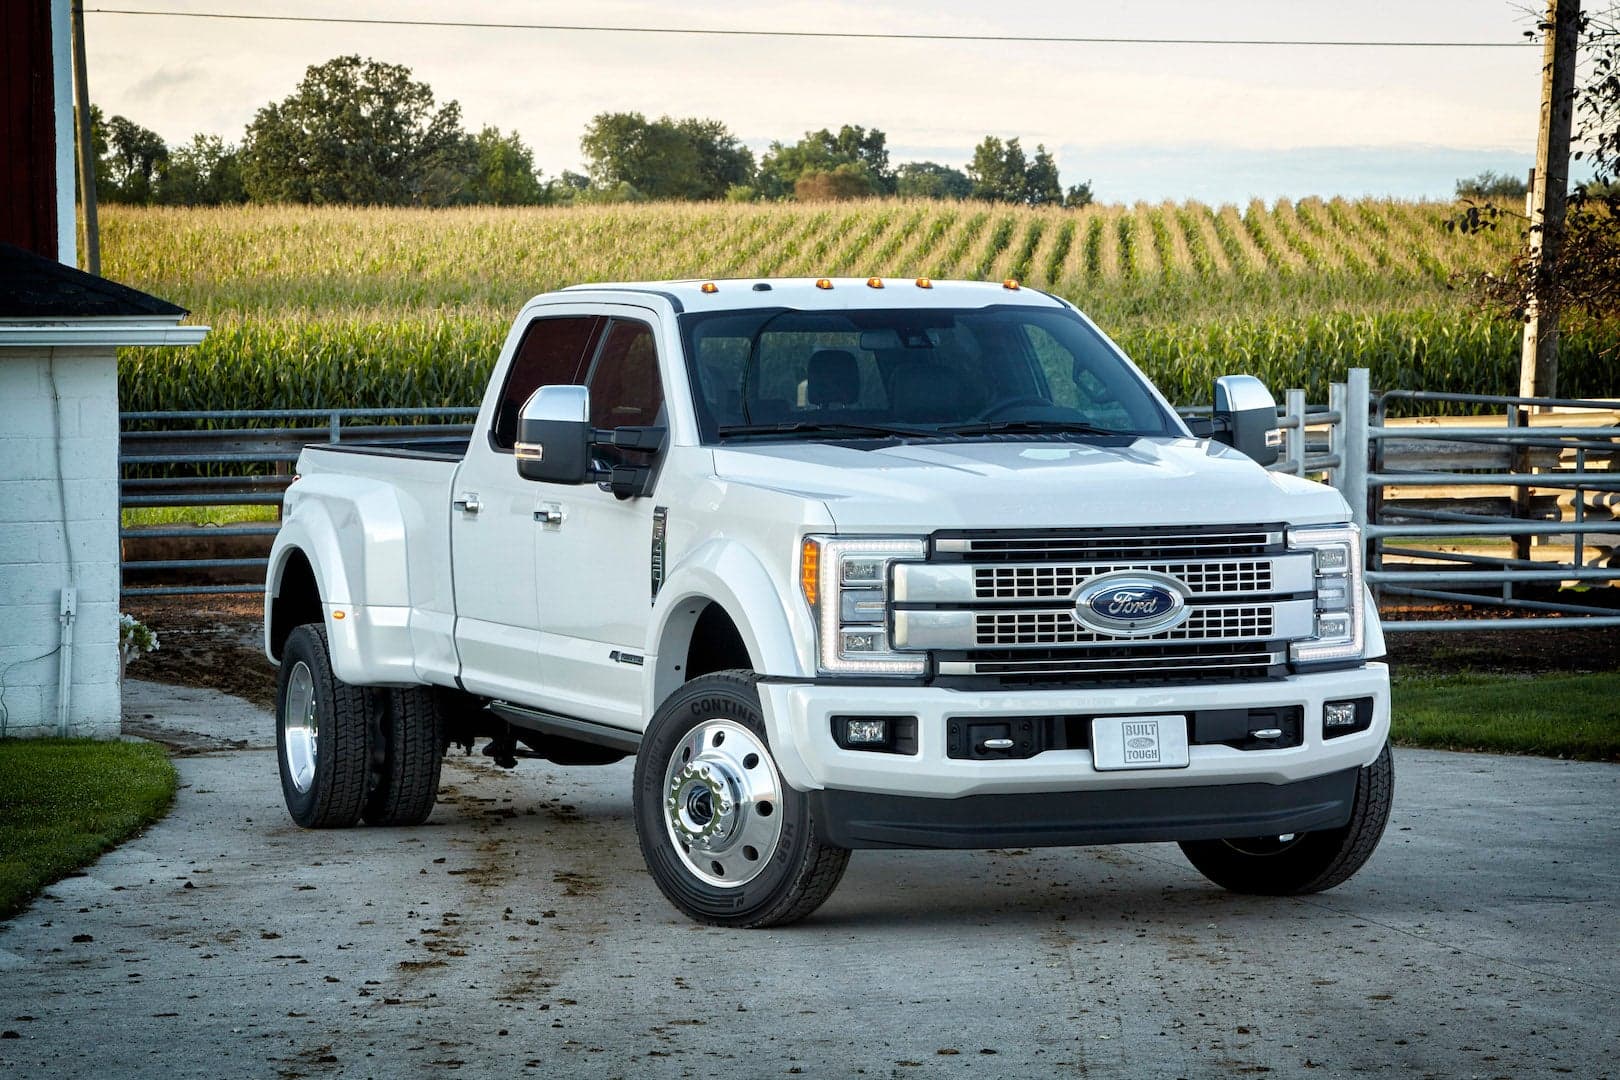 The Top 10 Most Expensive Pickup Trucks in the World